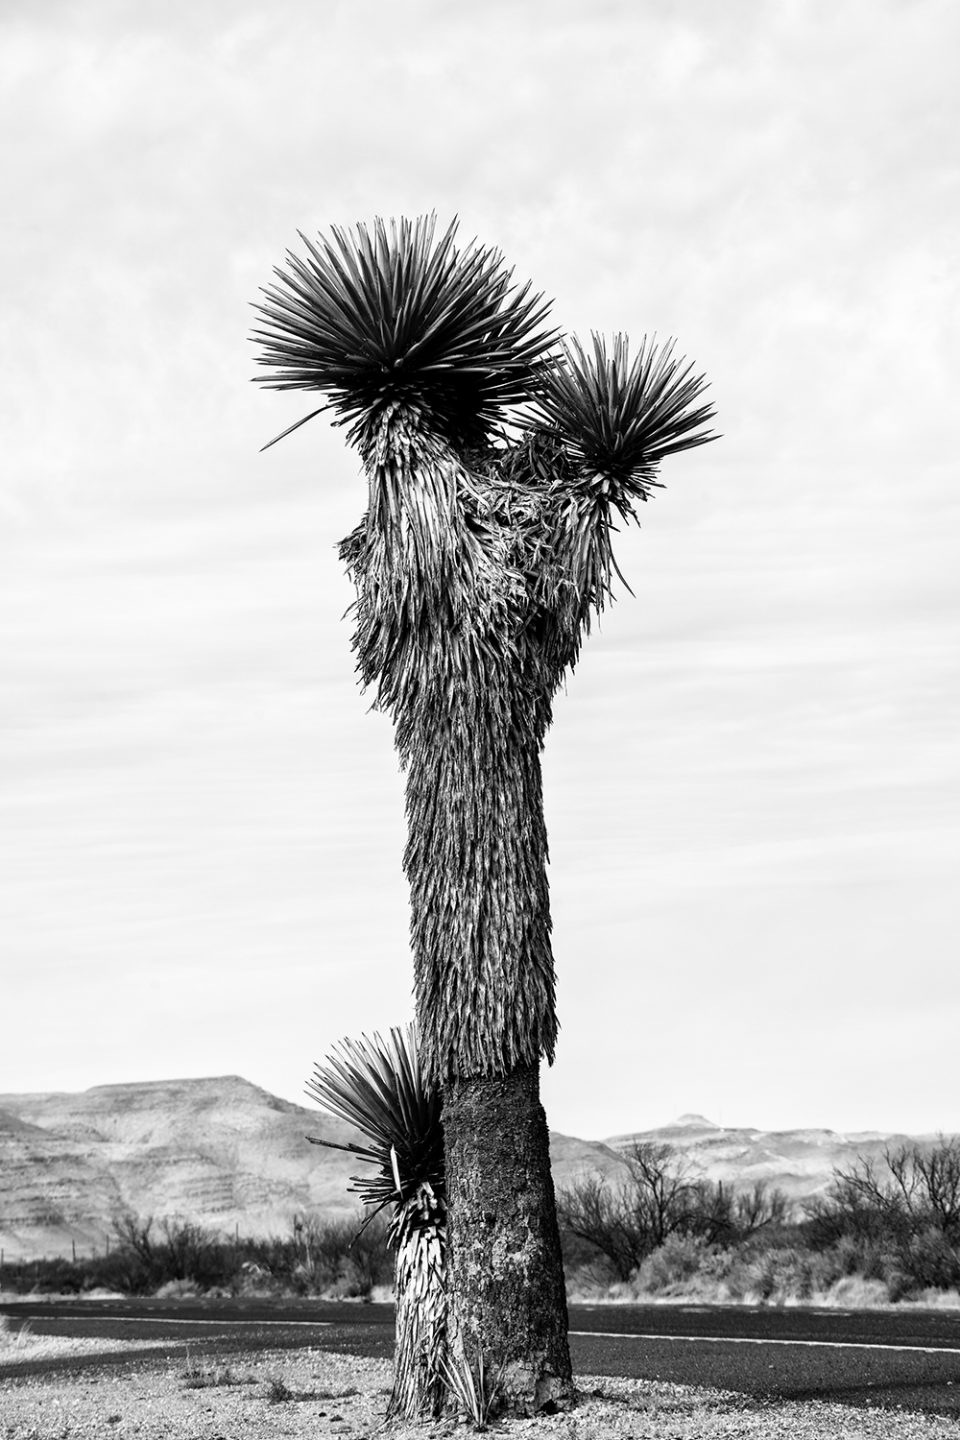 'Big Yucca on Highway 90 in West Texas,' black and white landscape photograph by Keith Dotson. Fine art prints available up to 40 x 60-inches.